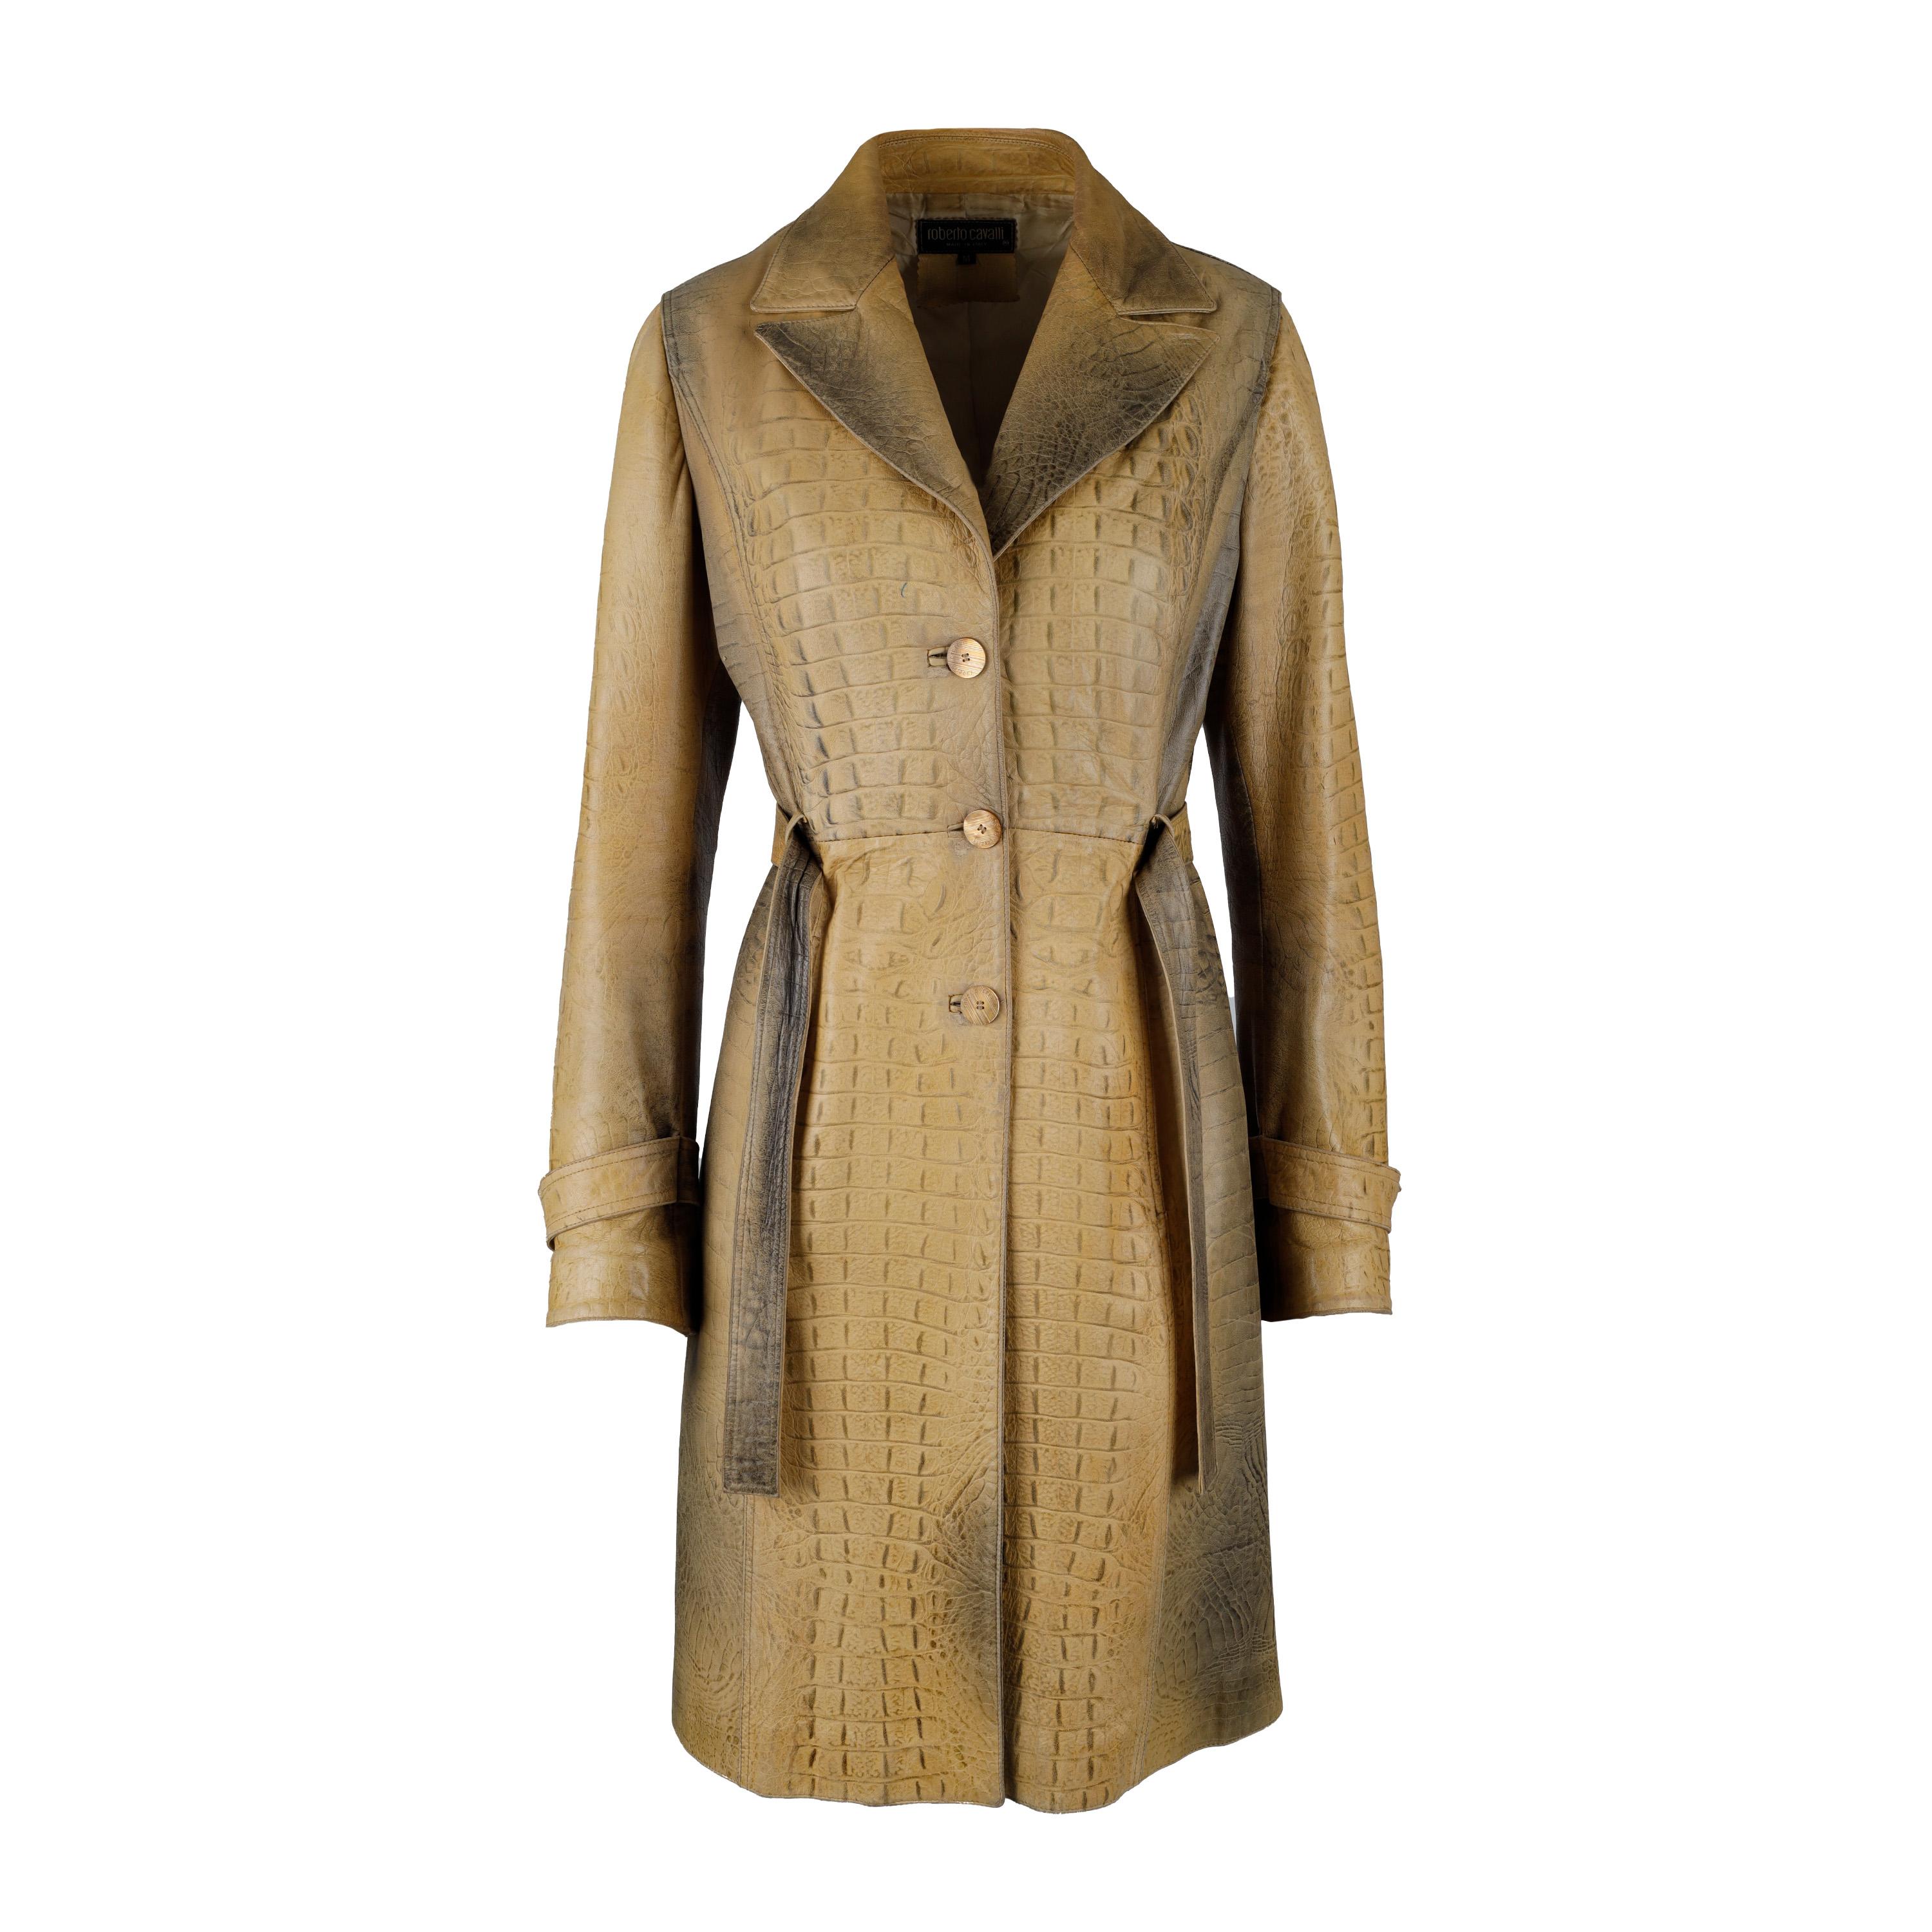 Roberto Cavalli Croc Embossed Leather Trench Coat For Sale 5